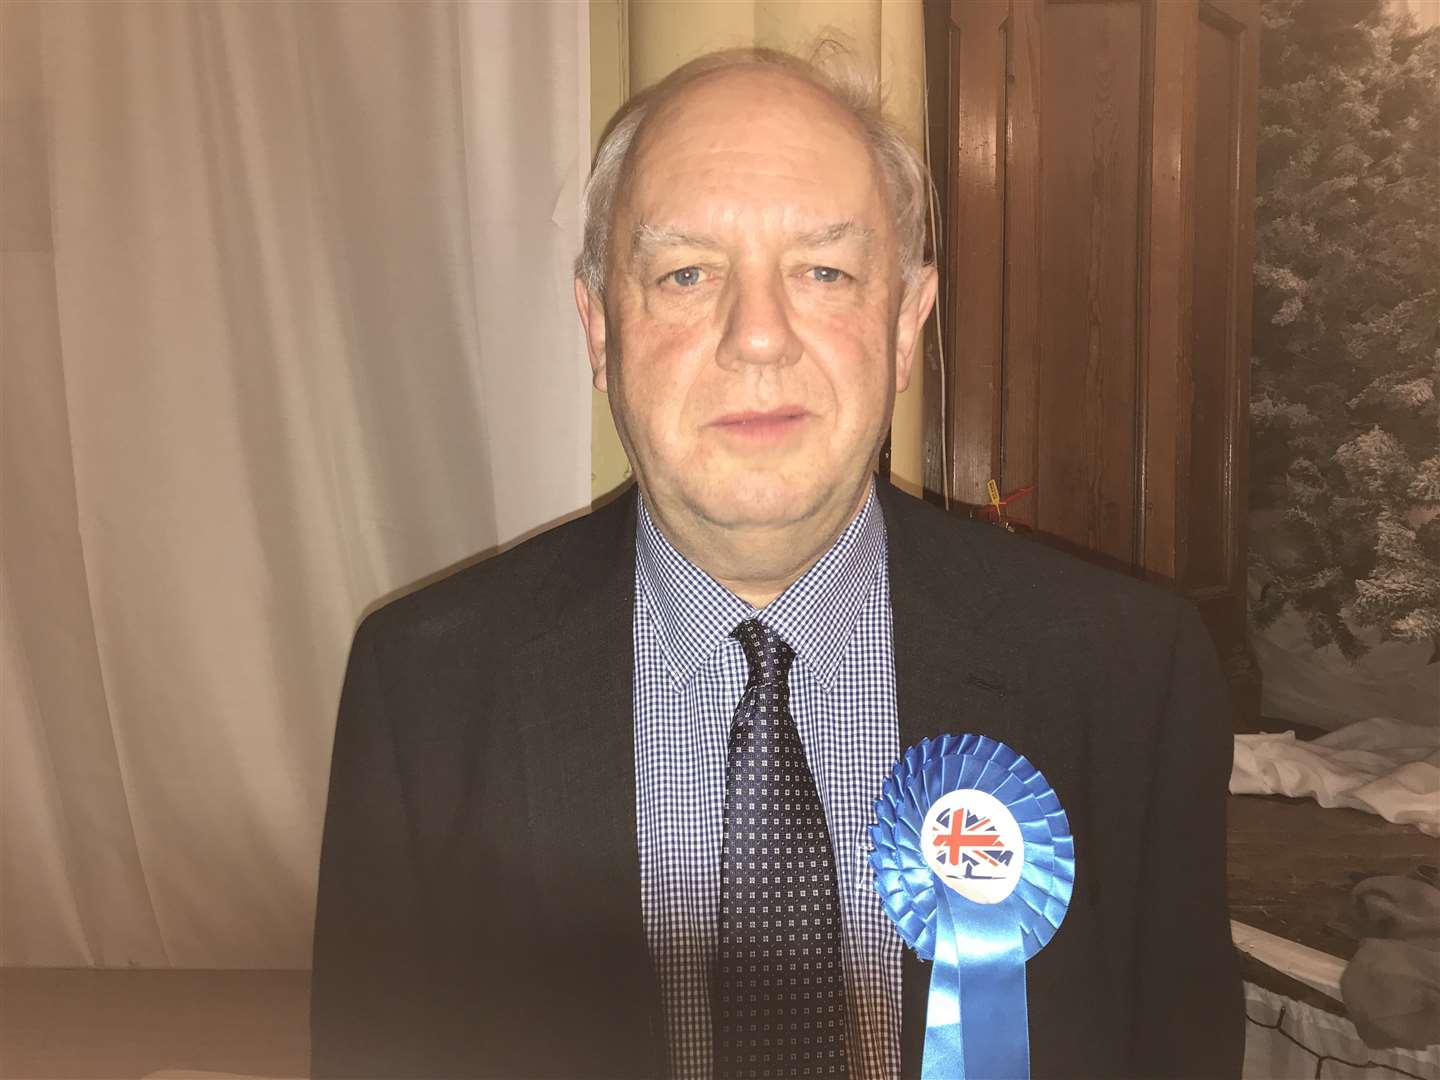 Martin Bates (Con) is a new district councillor for the Guston, Kingsdown and St Margaret's-at-Cliffe ward